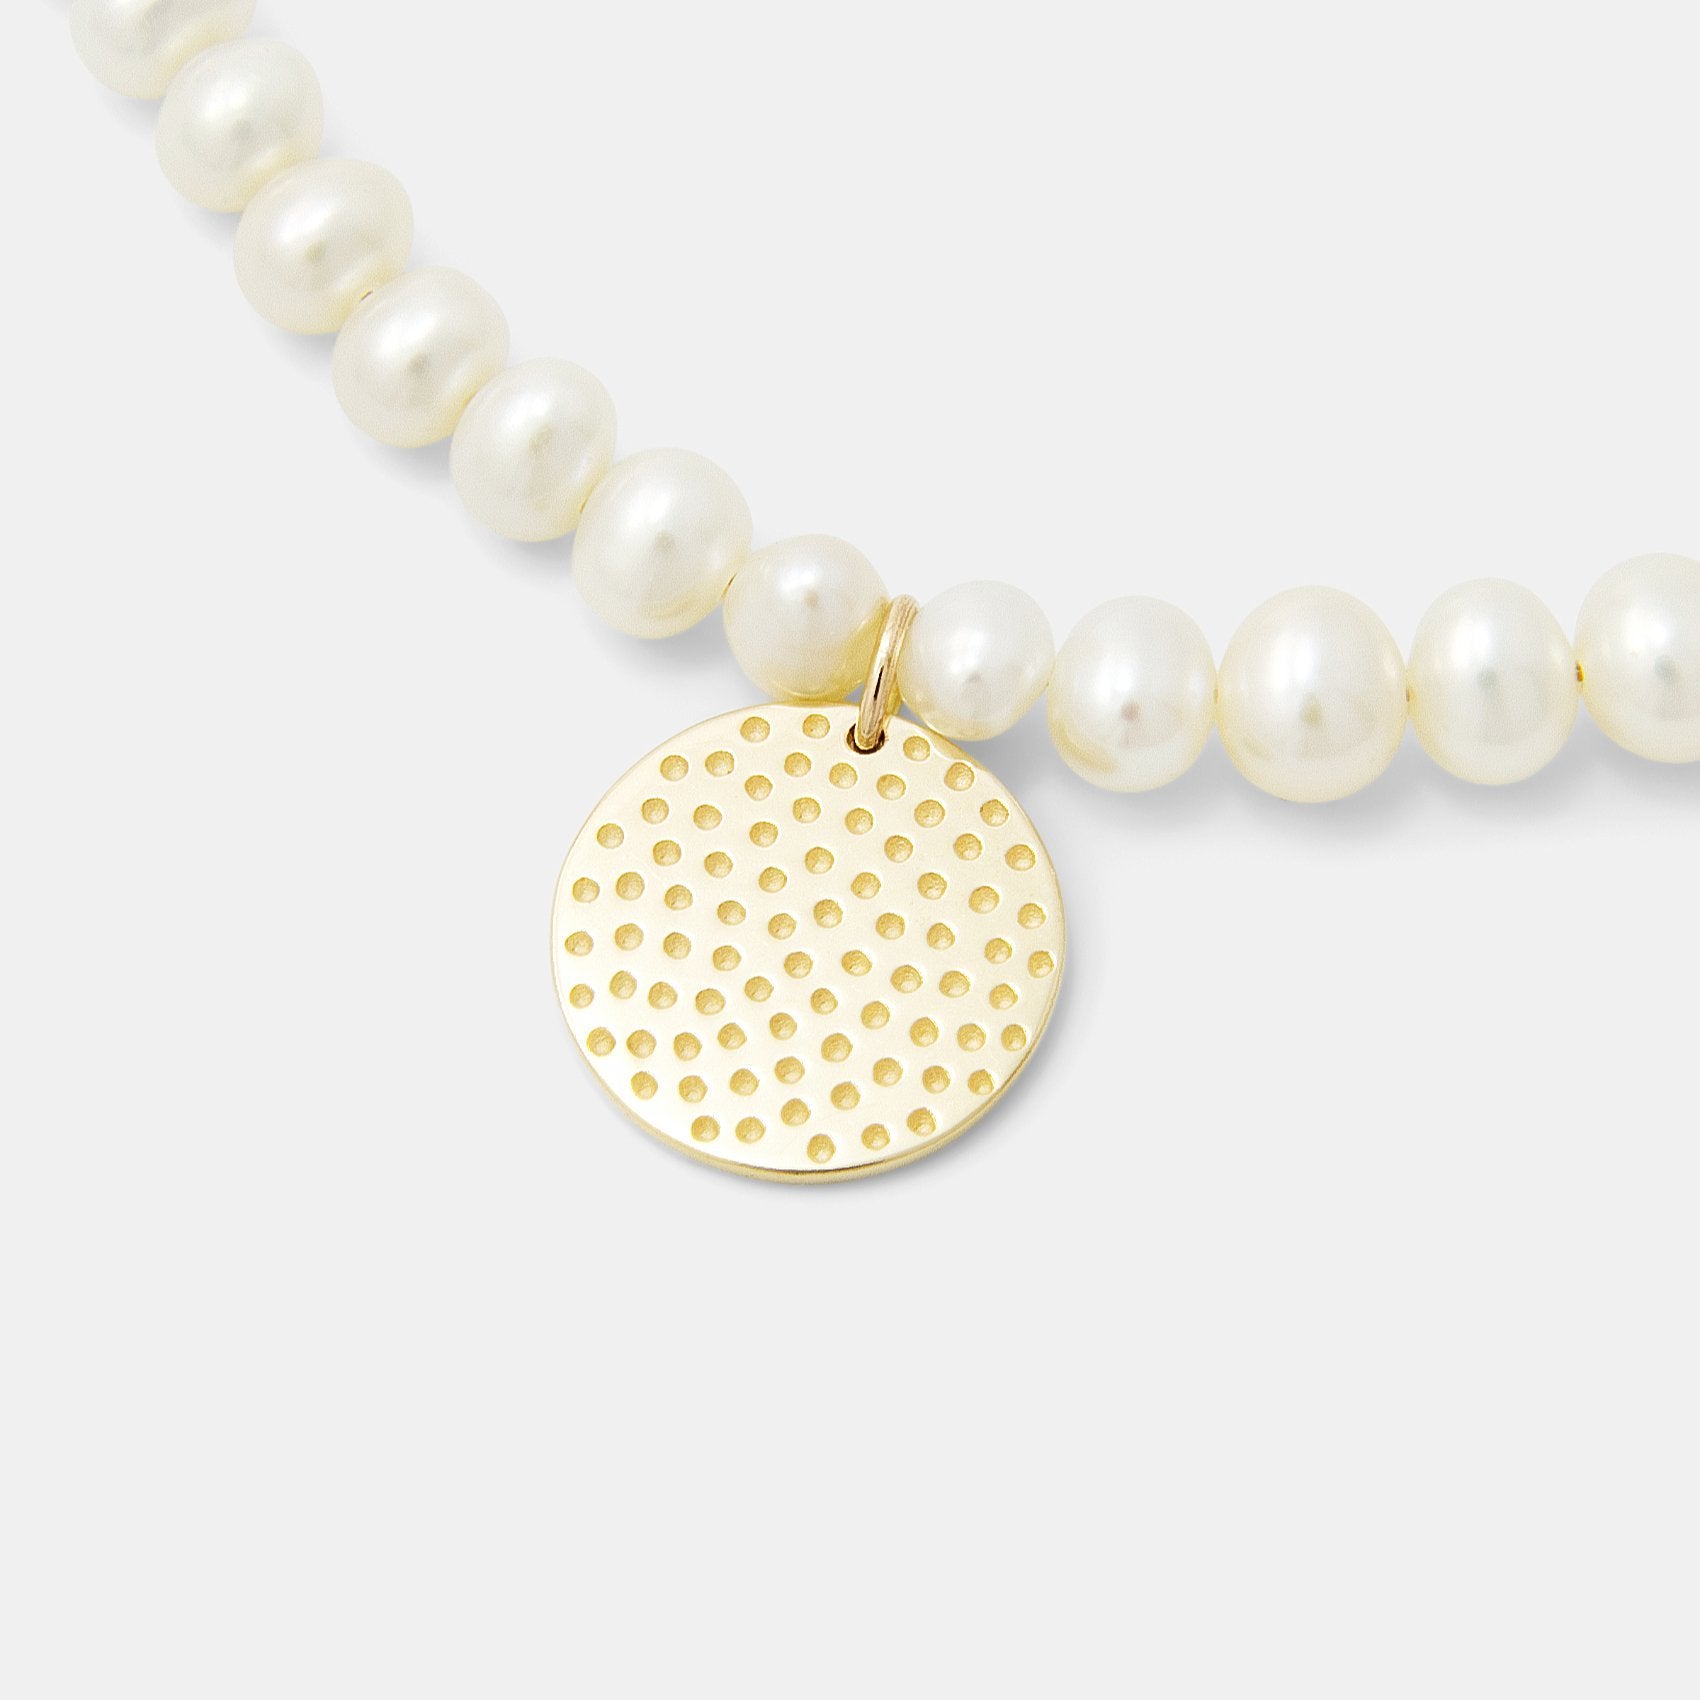 Dots texture solid gold pendant on pearls - Simone Walsh Jewellery Australia